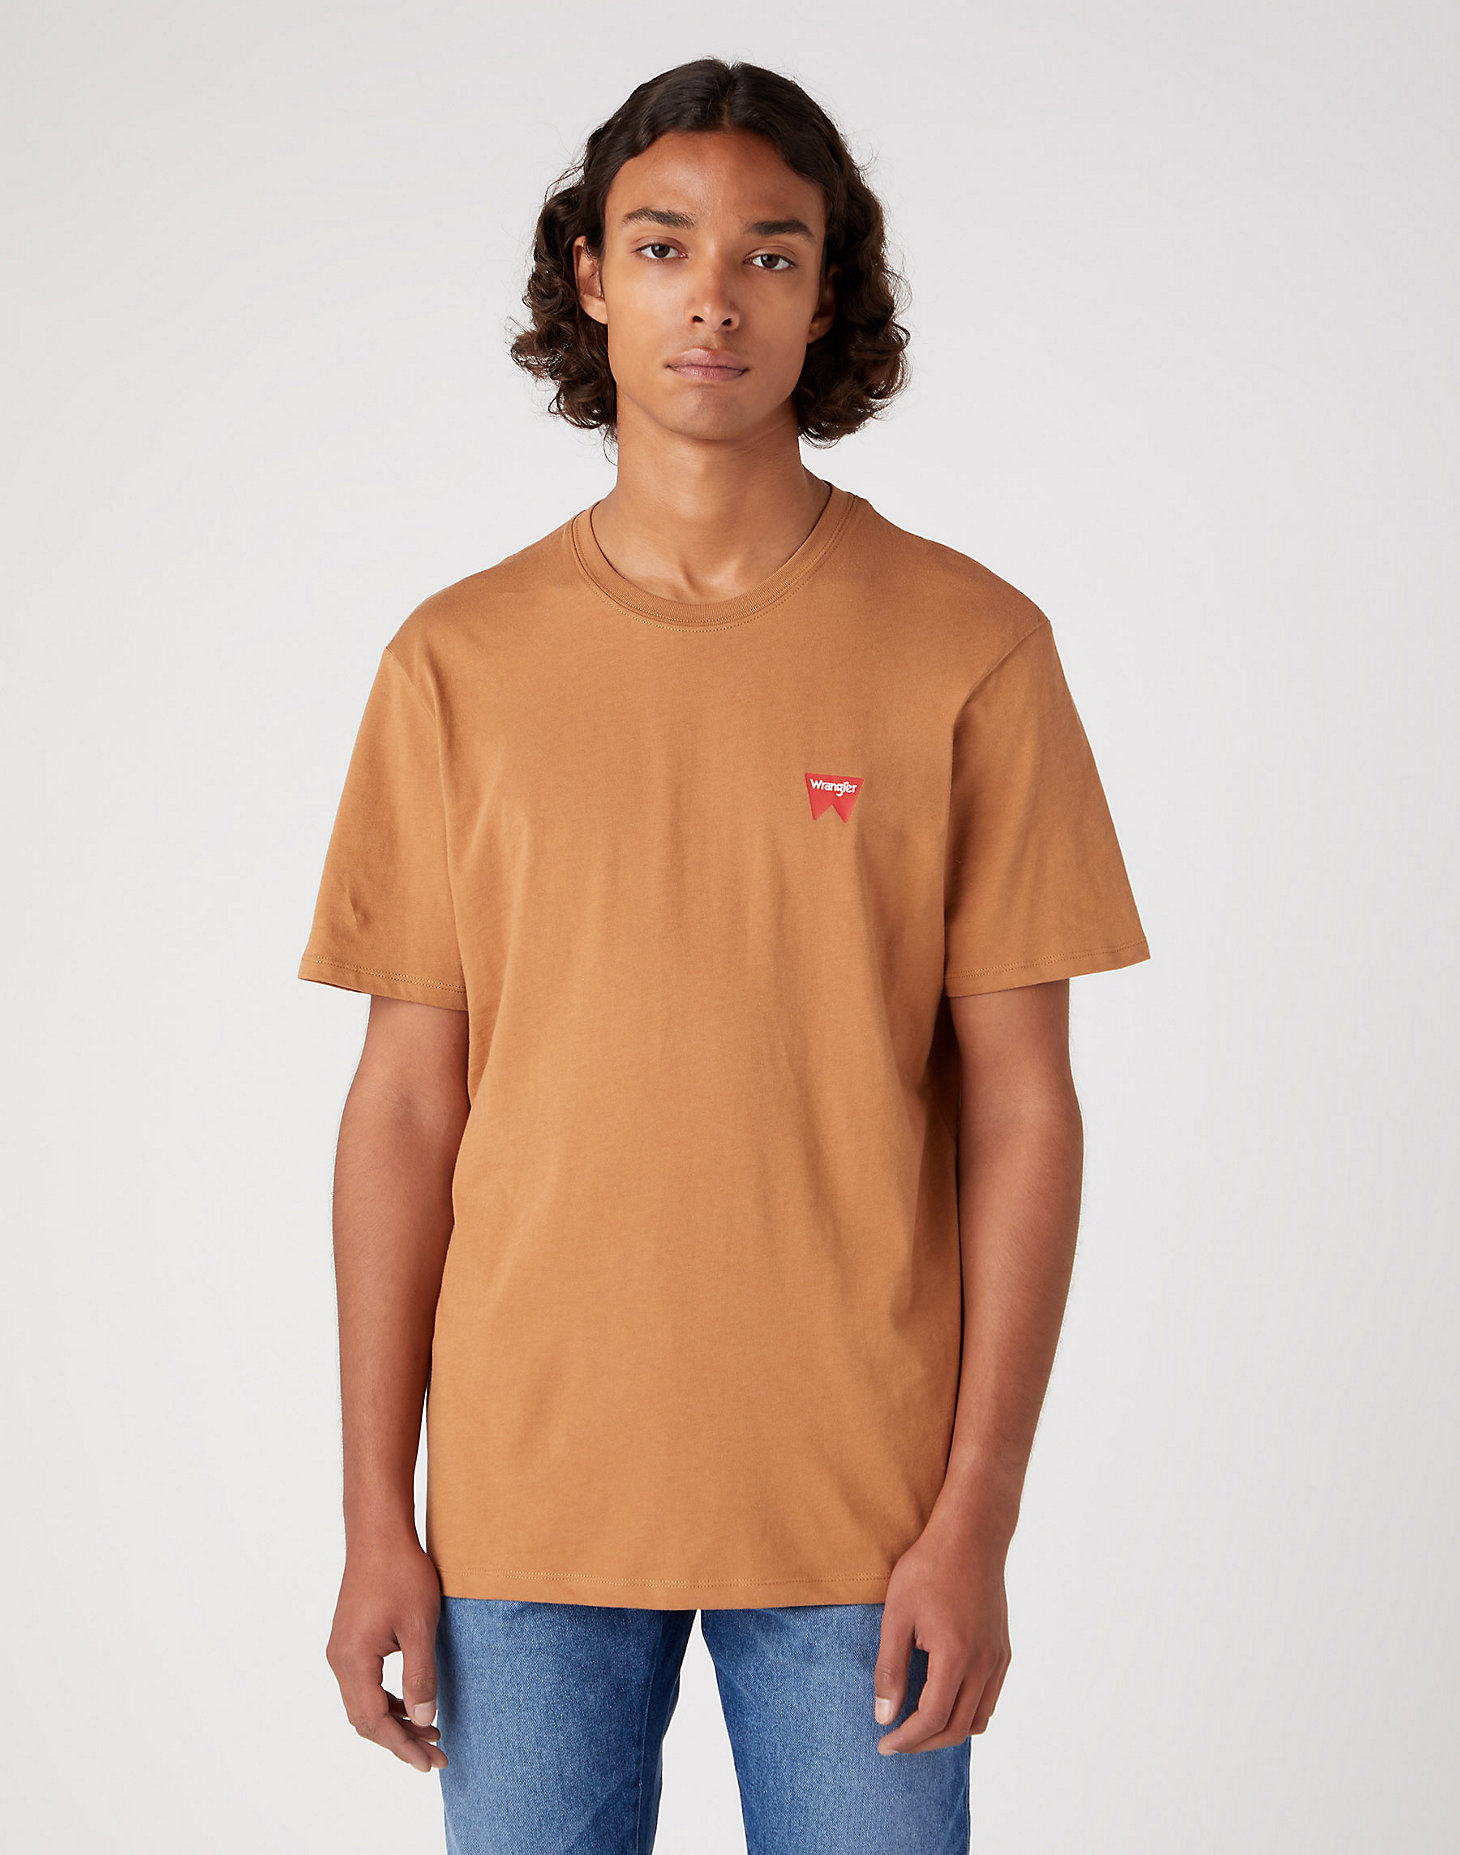 Sign Off Tee in Tobacco Brown main view